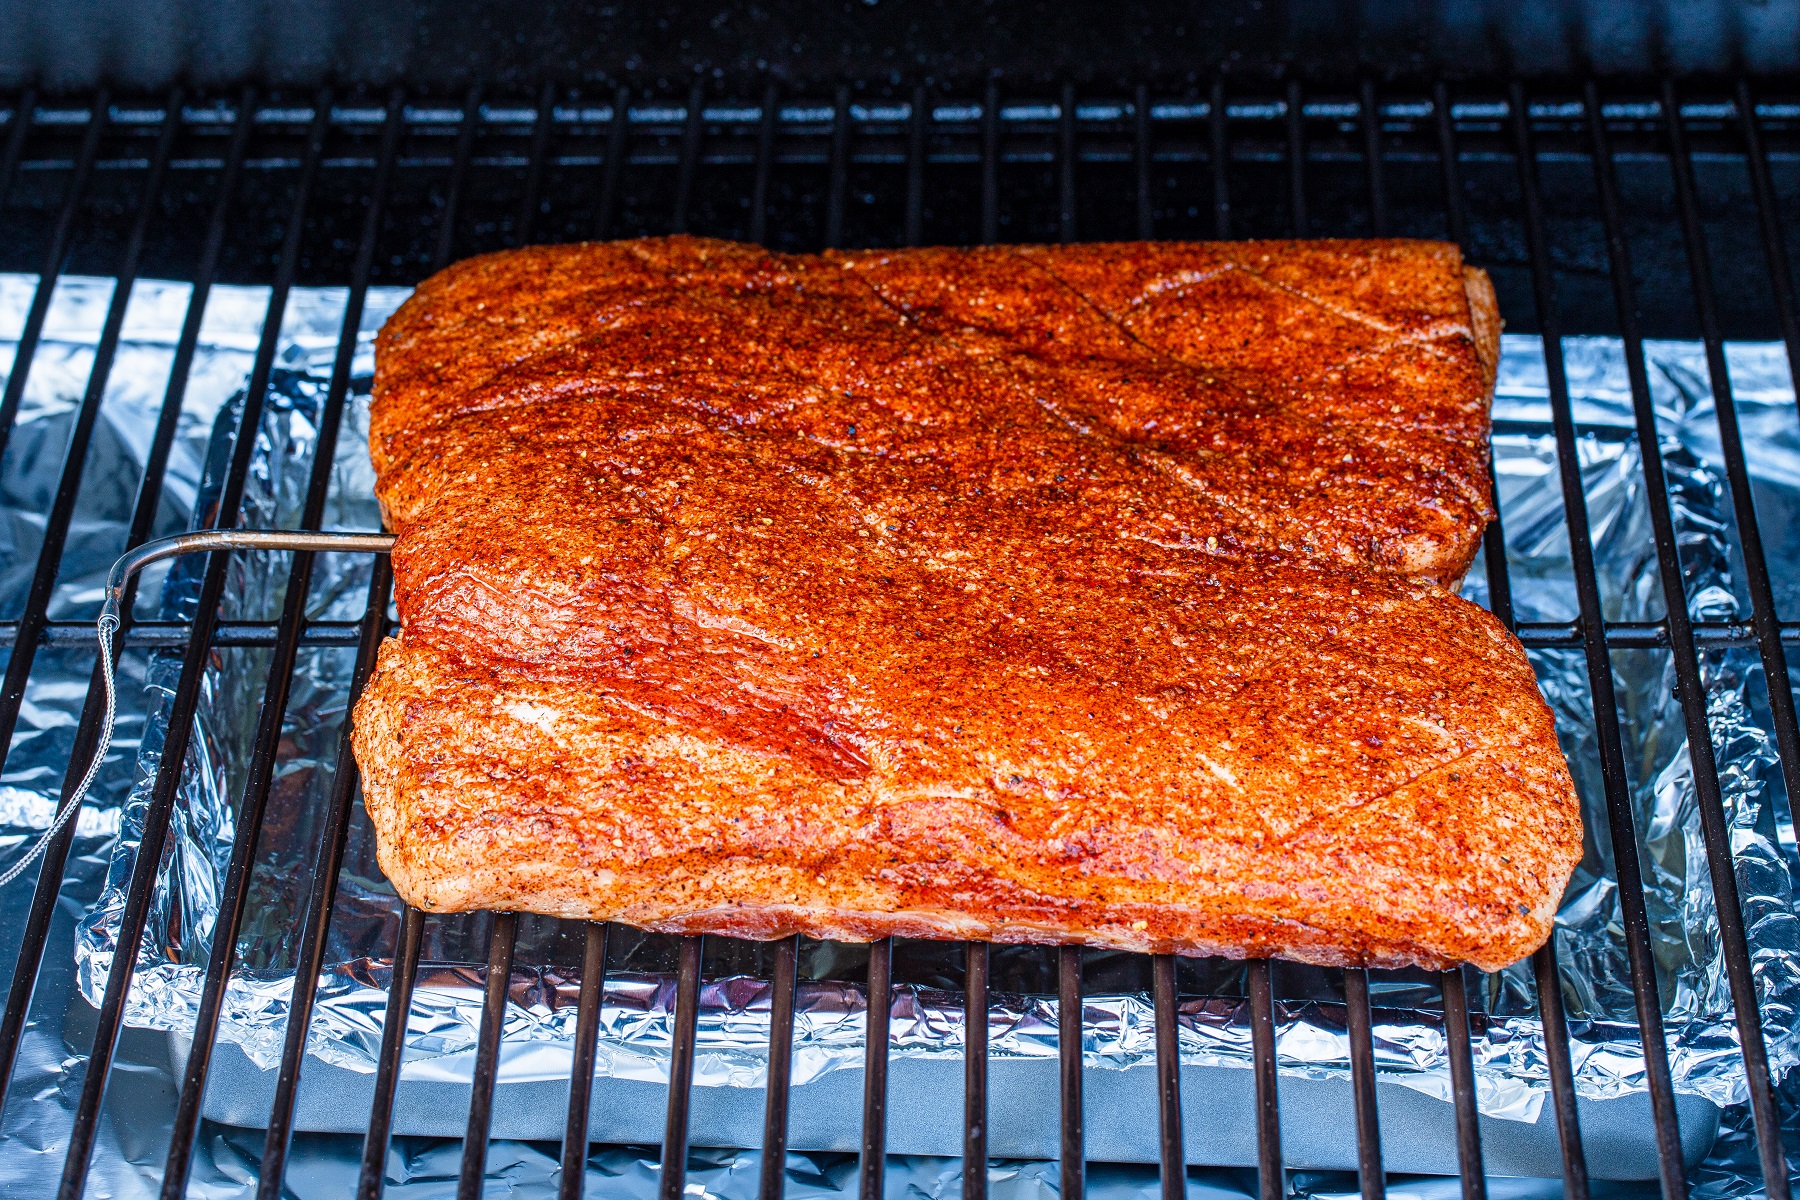 Whole Pork belly covered with dry rub just placed onto the smoker grill with a temperature probe inserted into the meat.